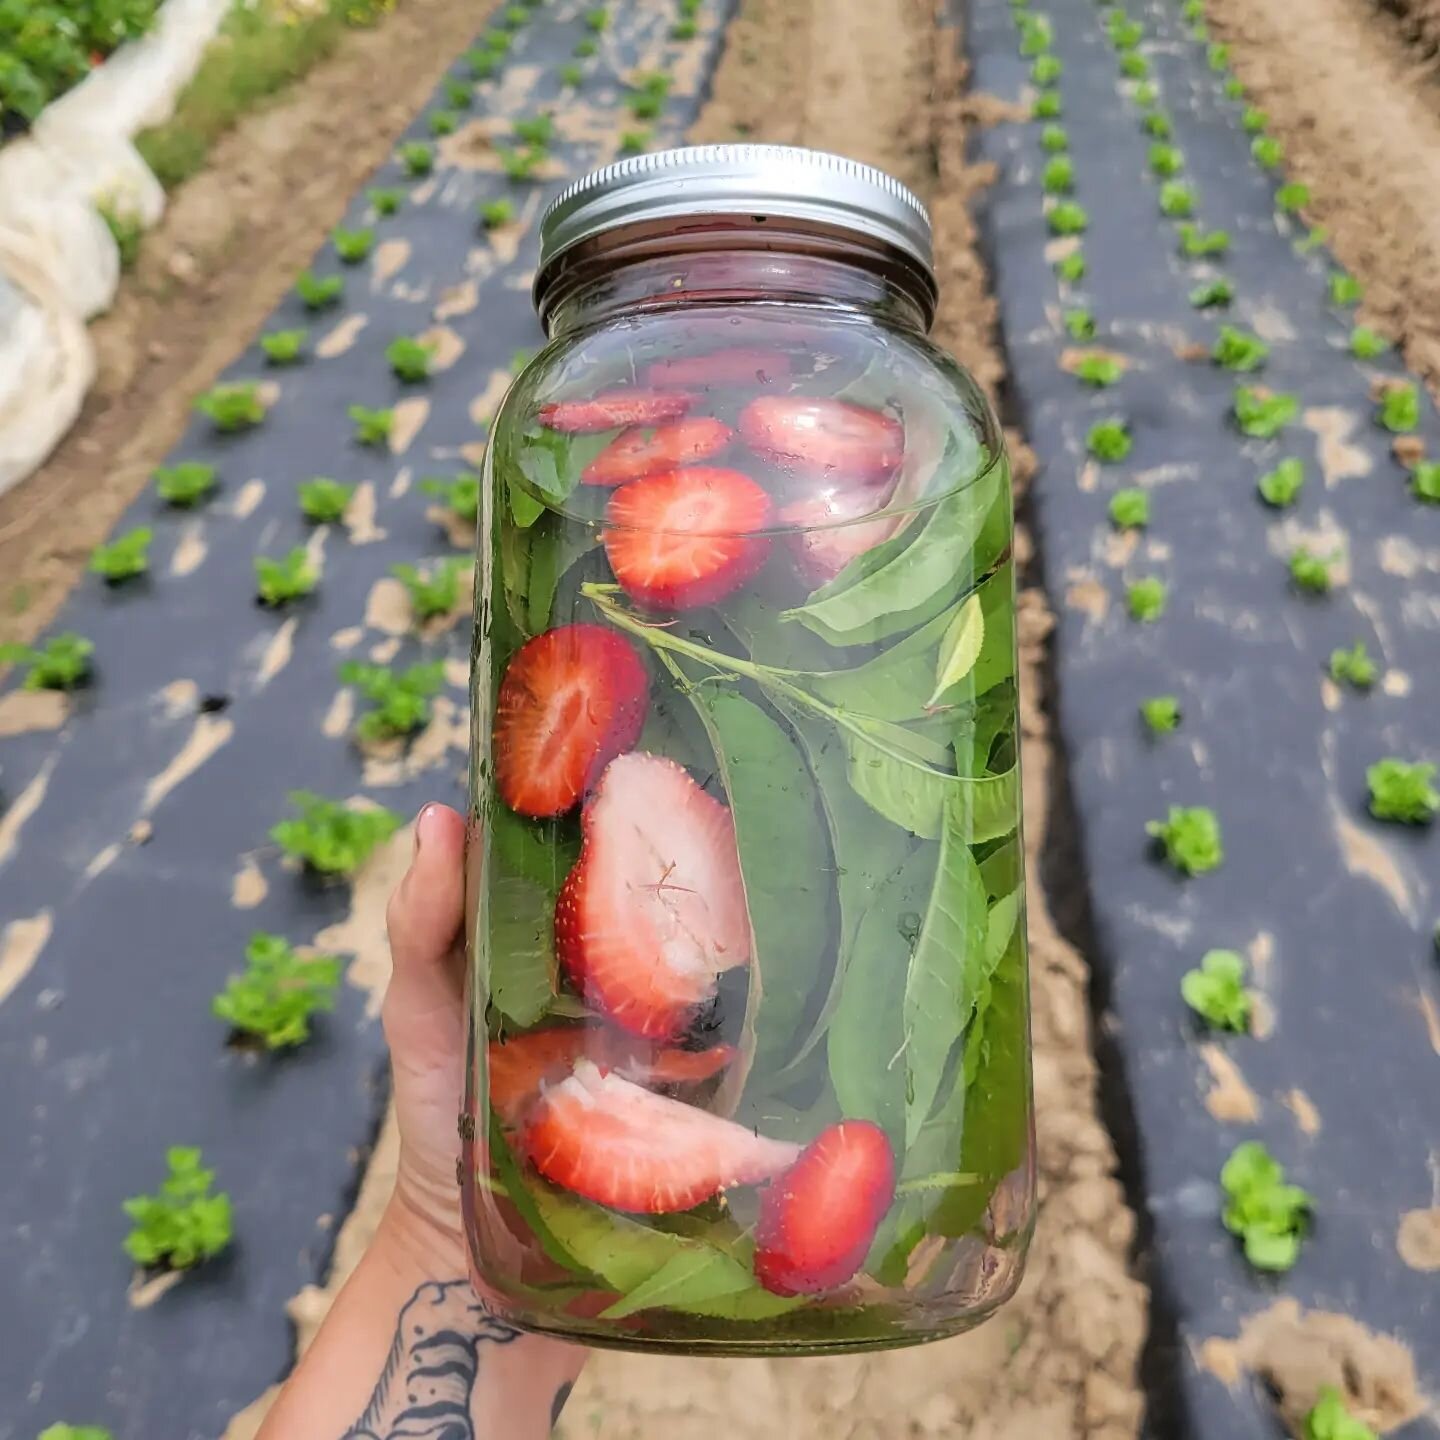 Hot tip- or should I say cool tip?
Peach leaf + strawberry cooler.

Spring never lasts long enough, temps are already starting to get up there, esp out in the field. Transitioning can feel brutal. 

Infusing peach leaf and strawberries (and other coo